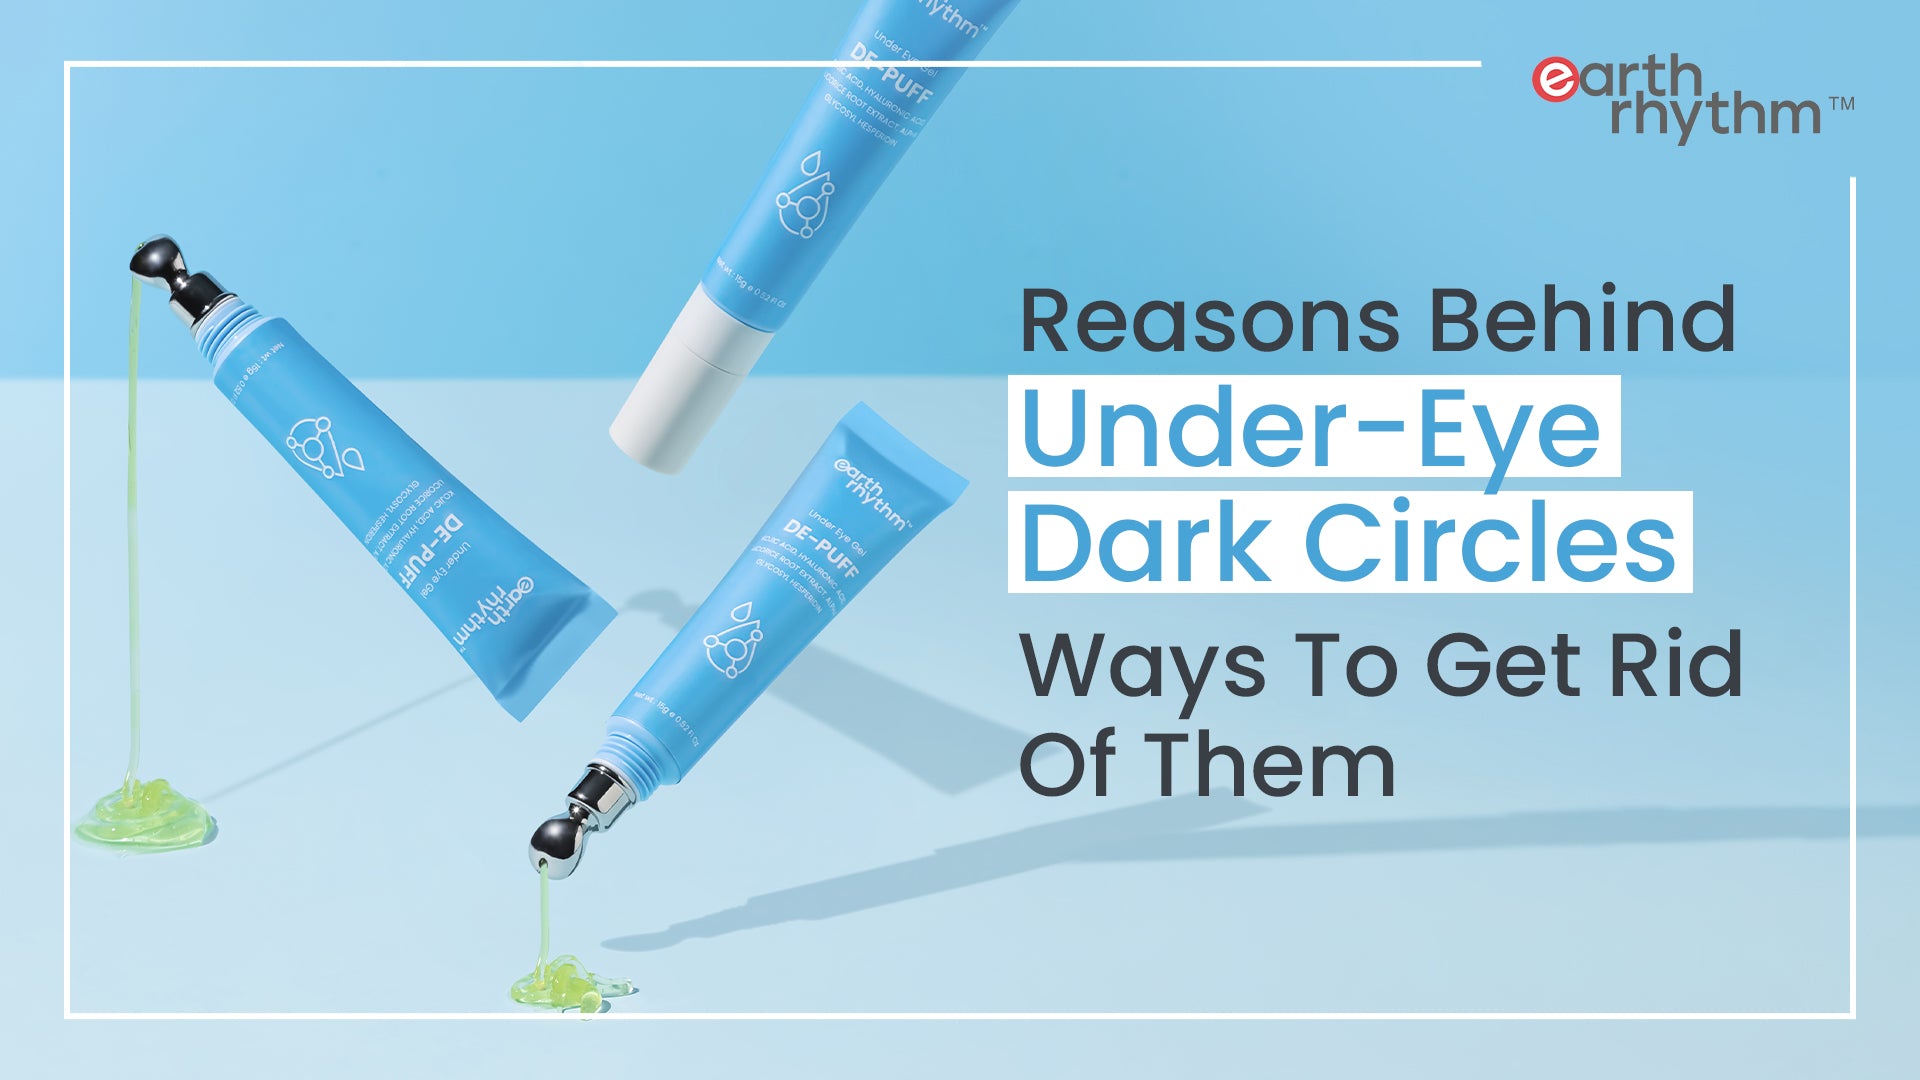 How to Get Rid of Dark Circles Under Your Eyes?